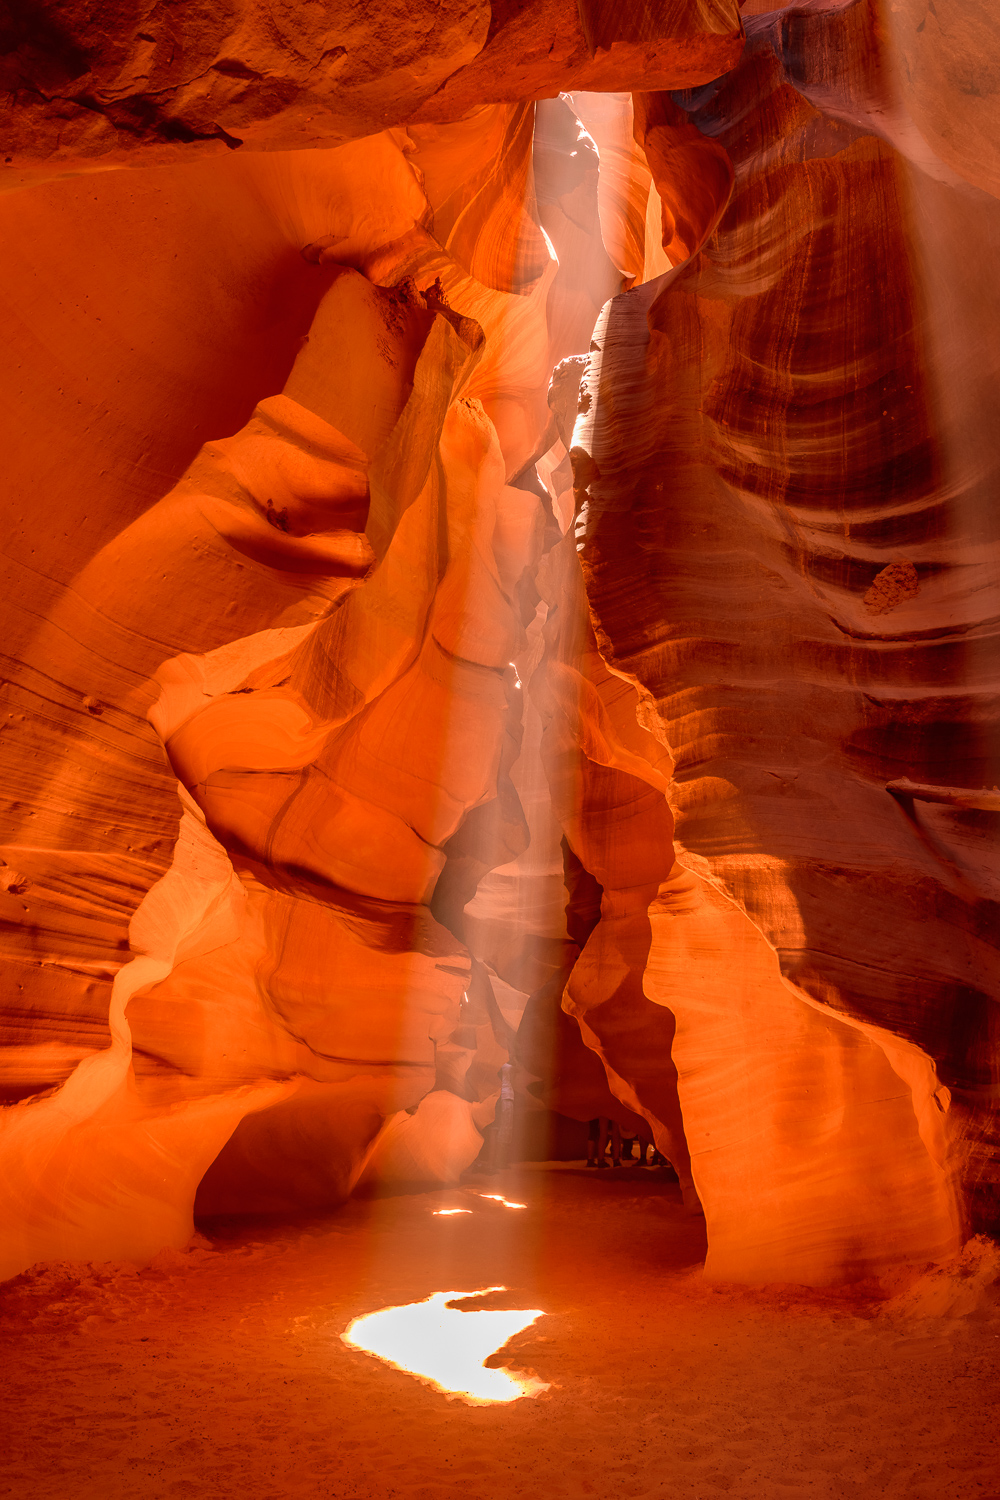 Shooting in Upper Antelope Canyon is only possible with a tripod - at least it makes it easier